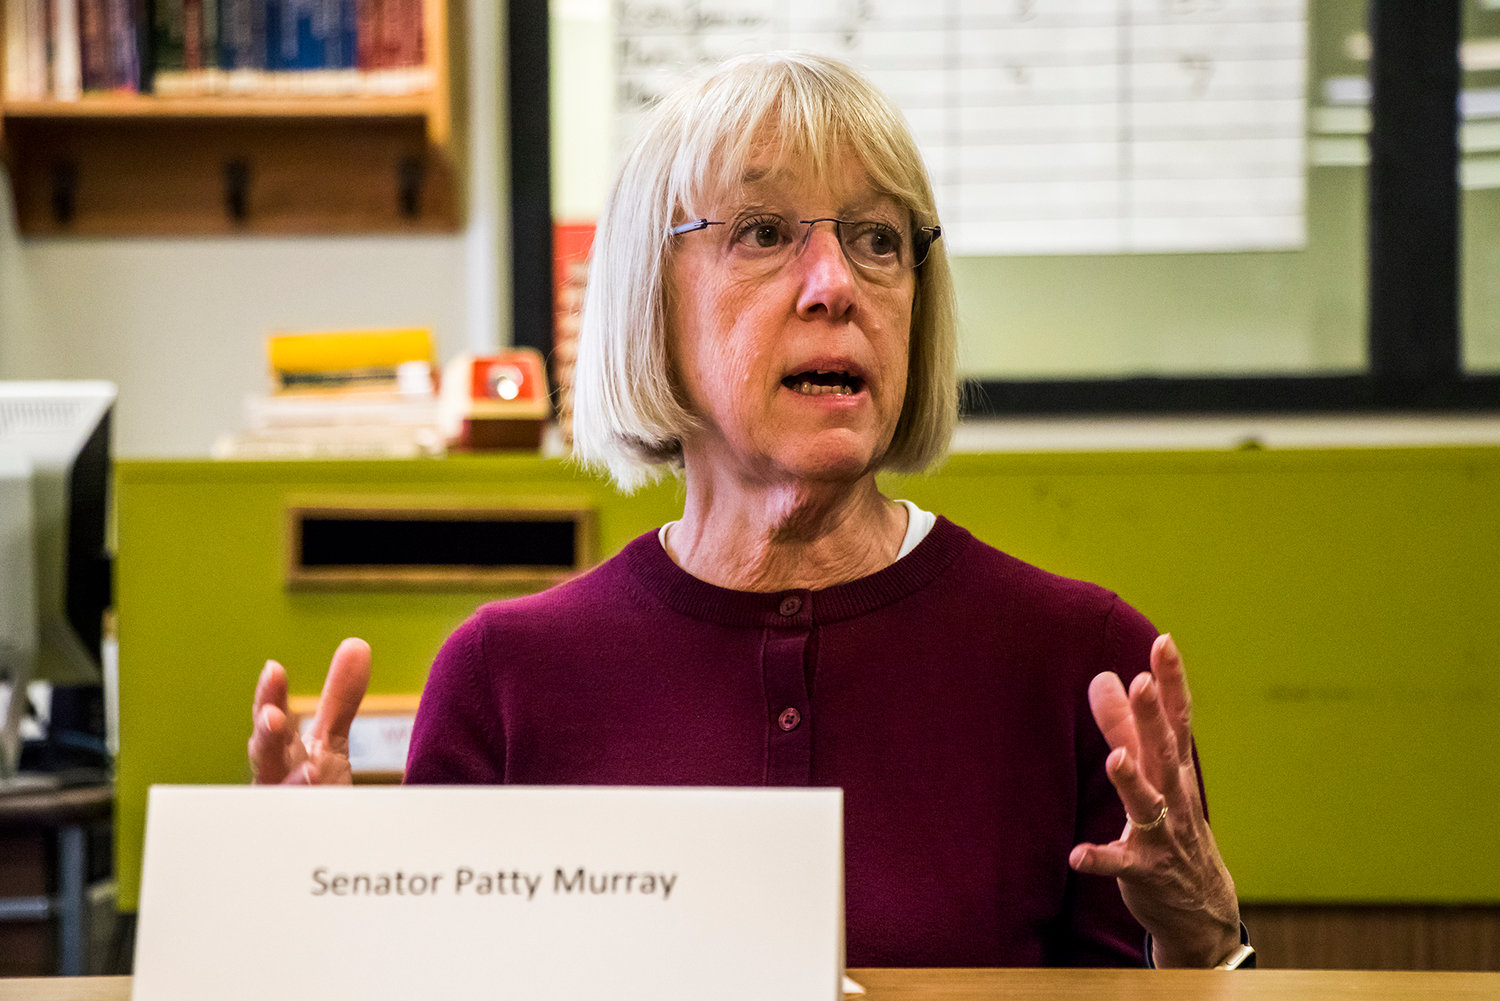 Senator Patty Murray attends a meeting with members of the community and school district in May 2019 at Toledo High School.